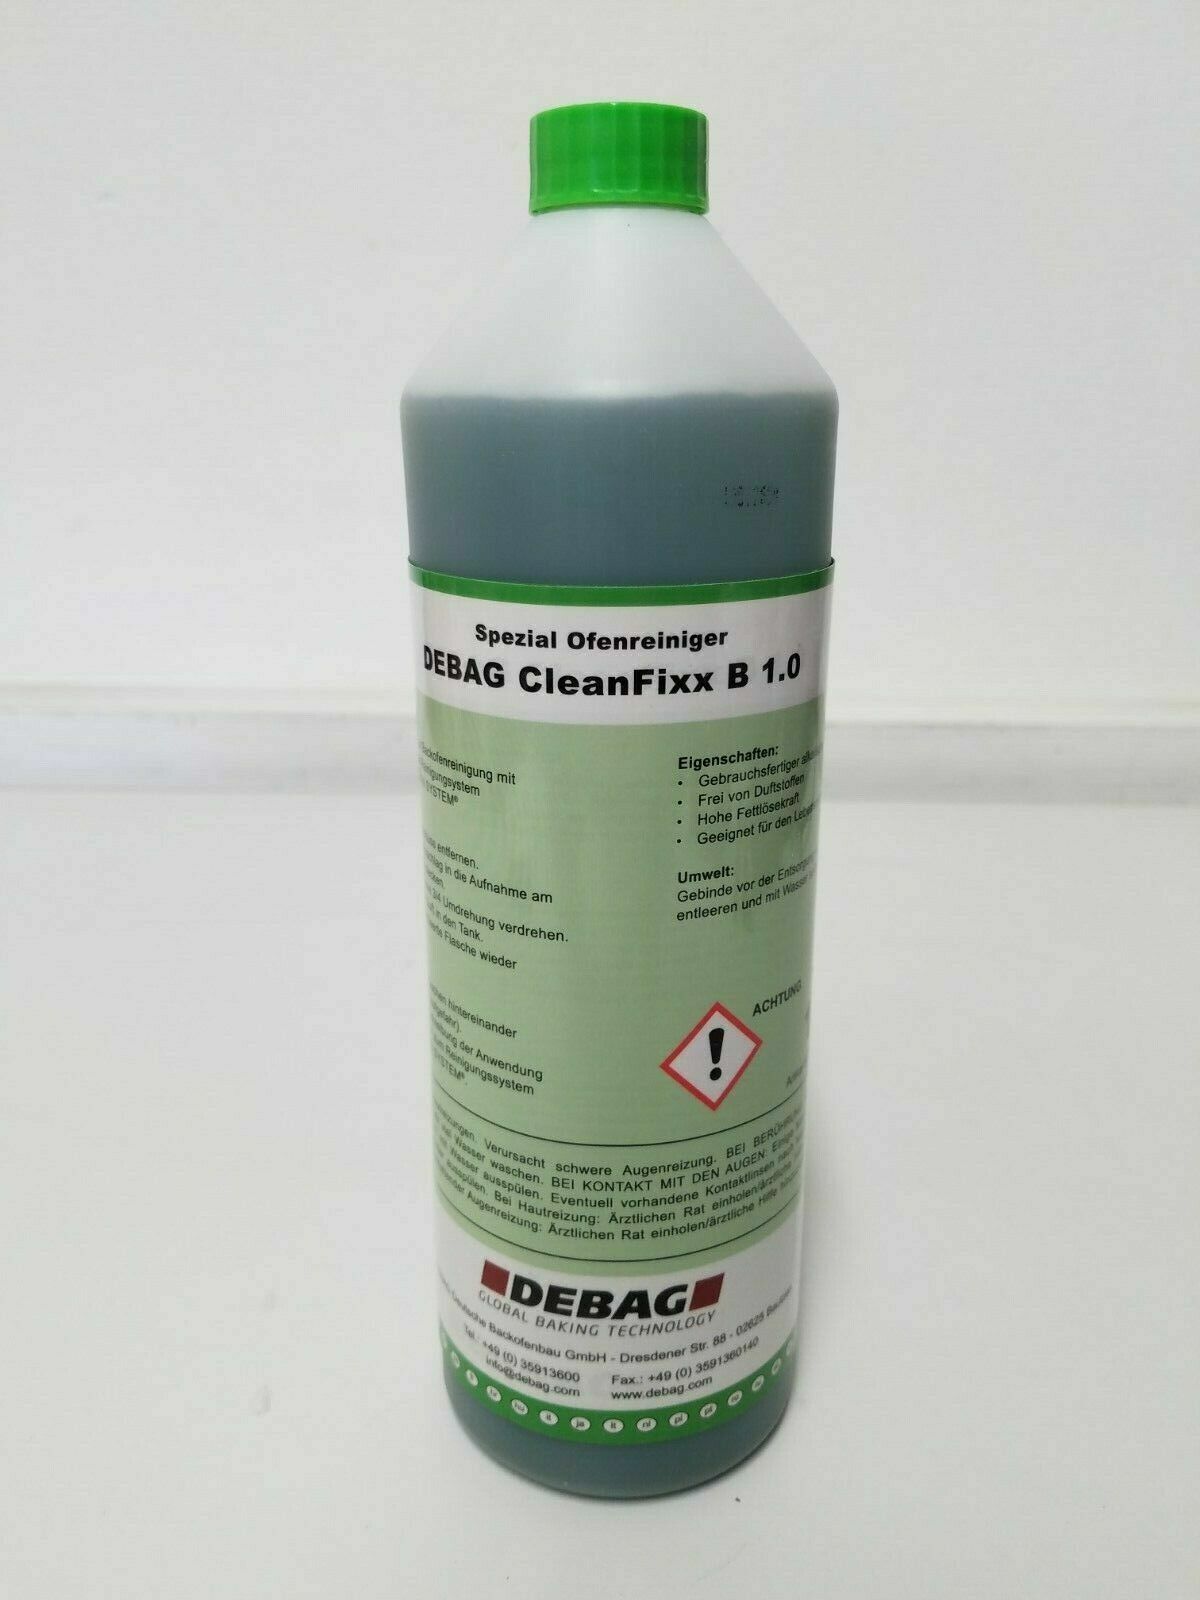 CleanFixx B 1.0 oven cleaning agent 1 box (12 bottles)